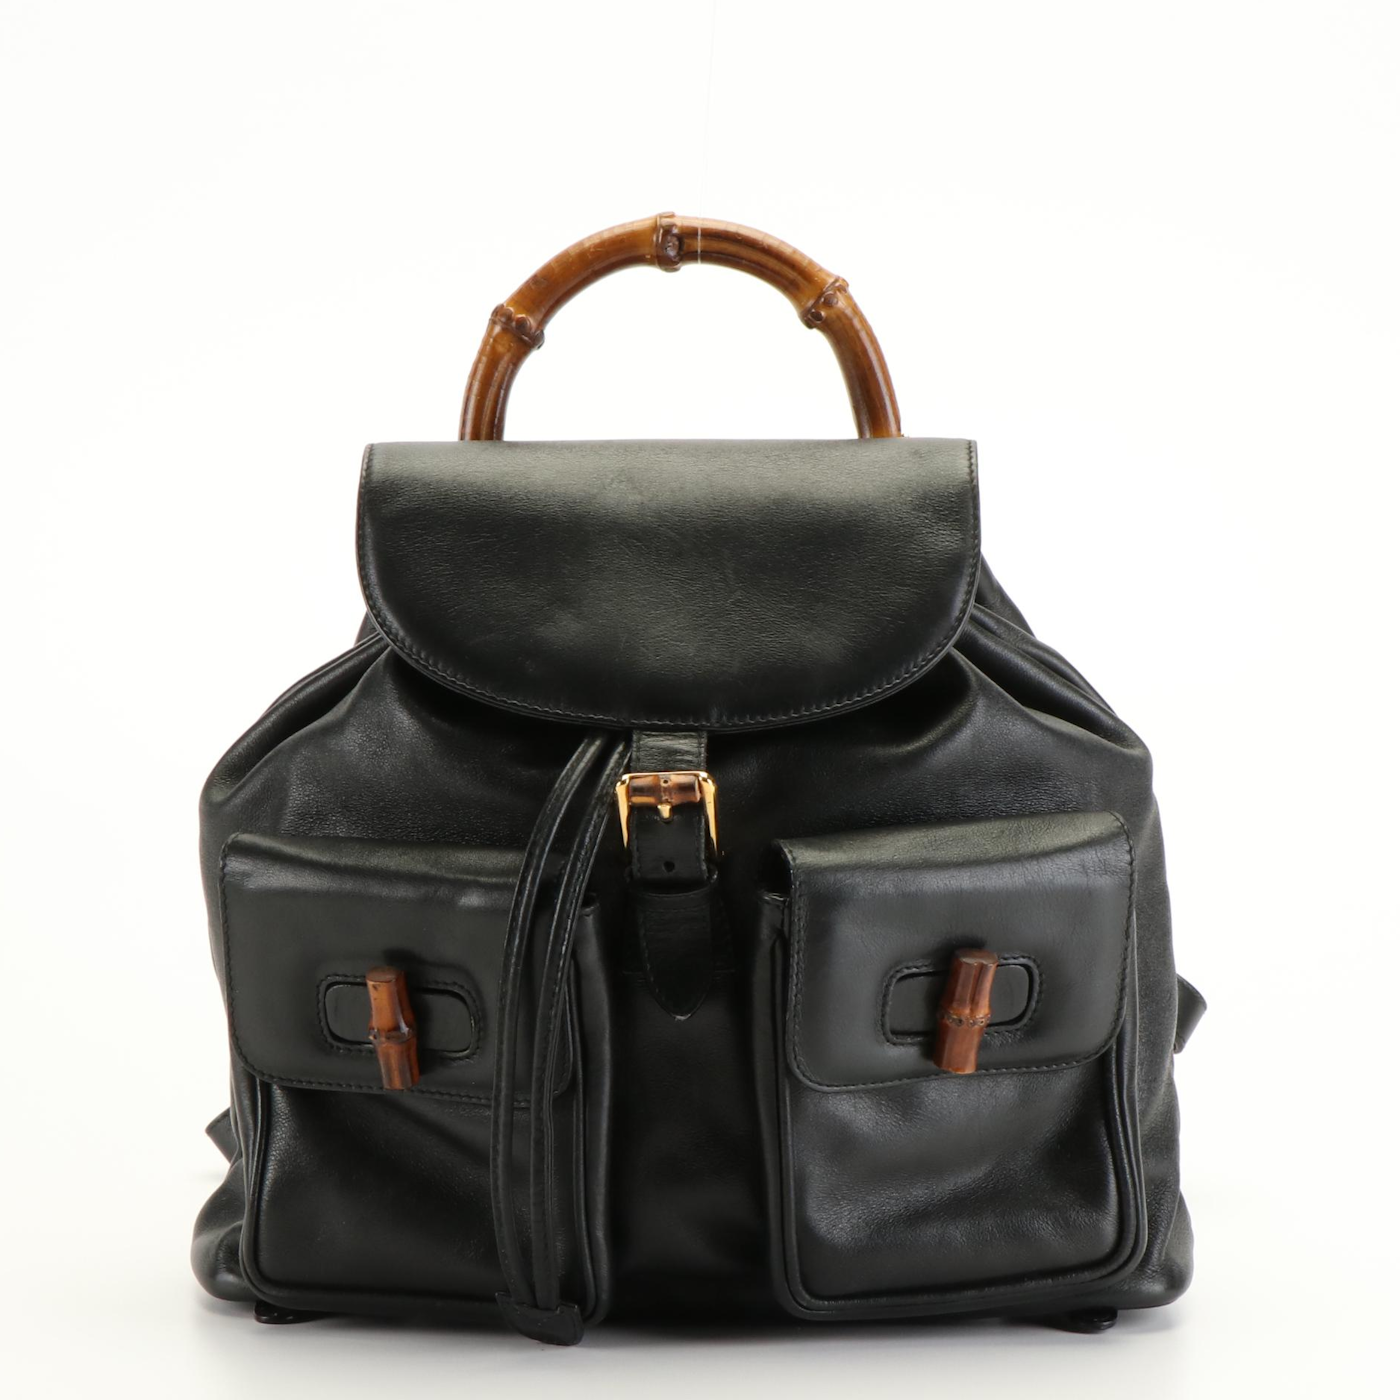 Gucci Bamboo Black Leather Backpack | EBTH